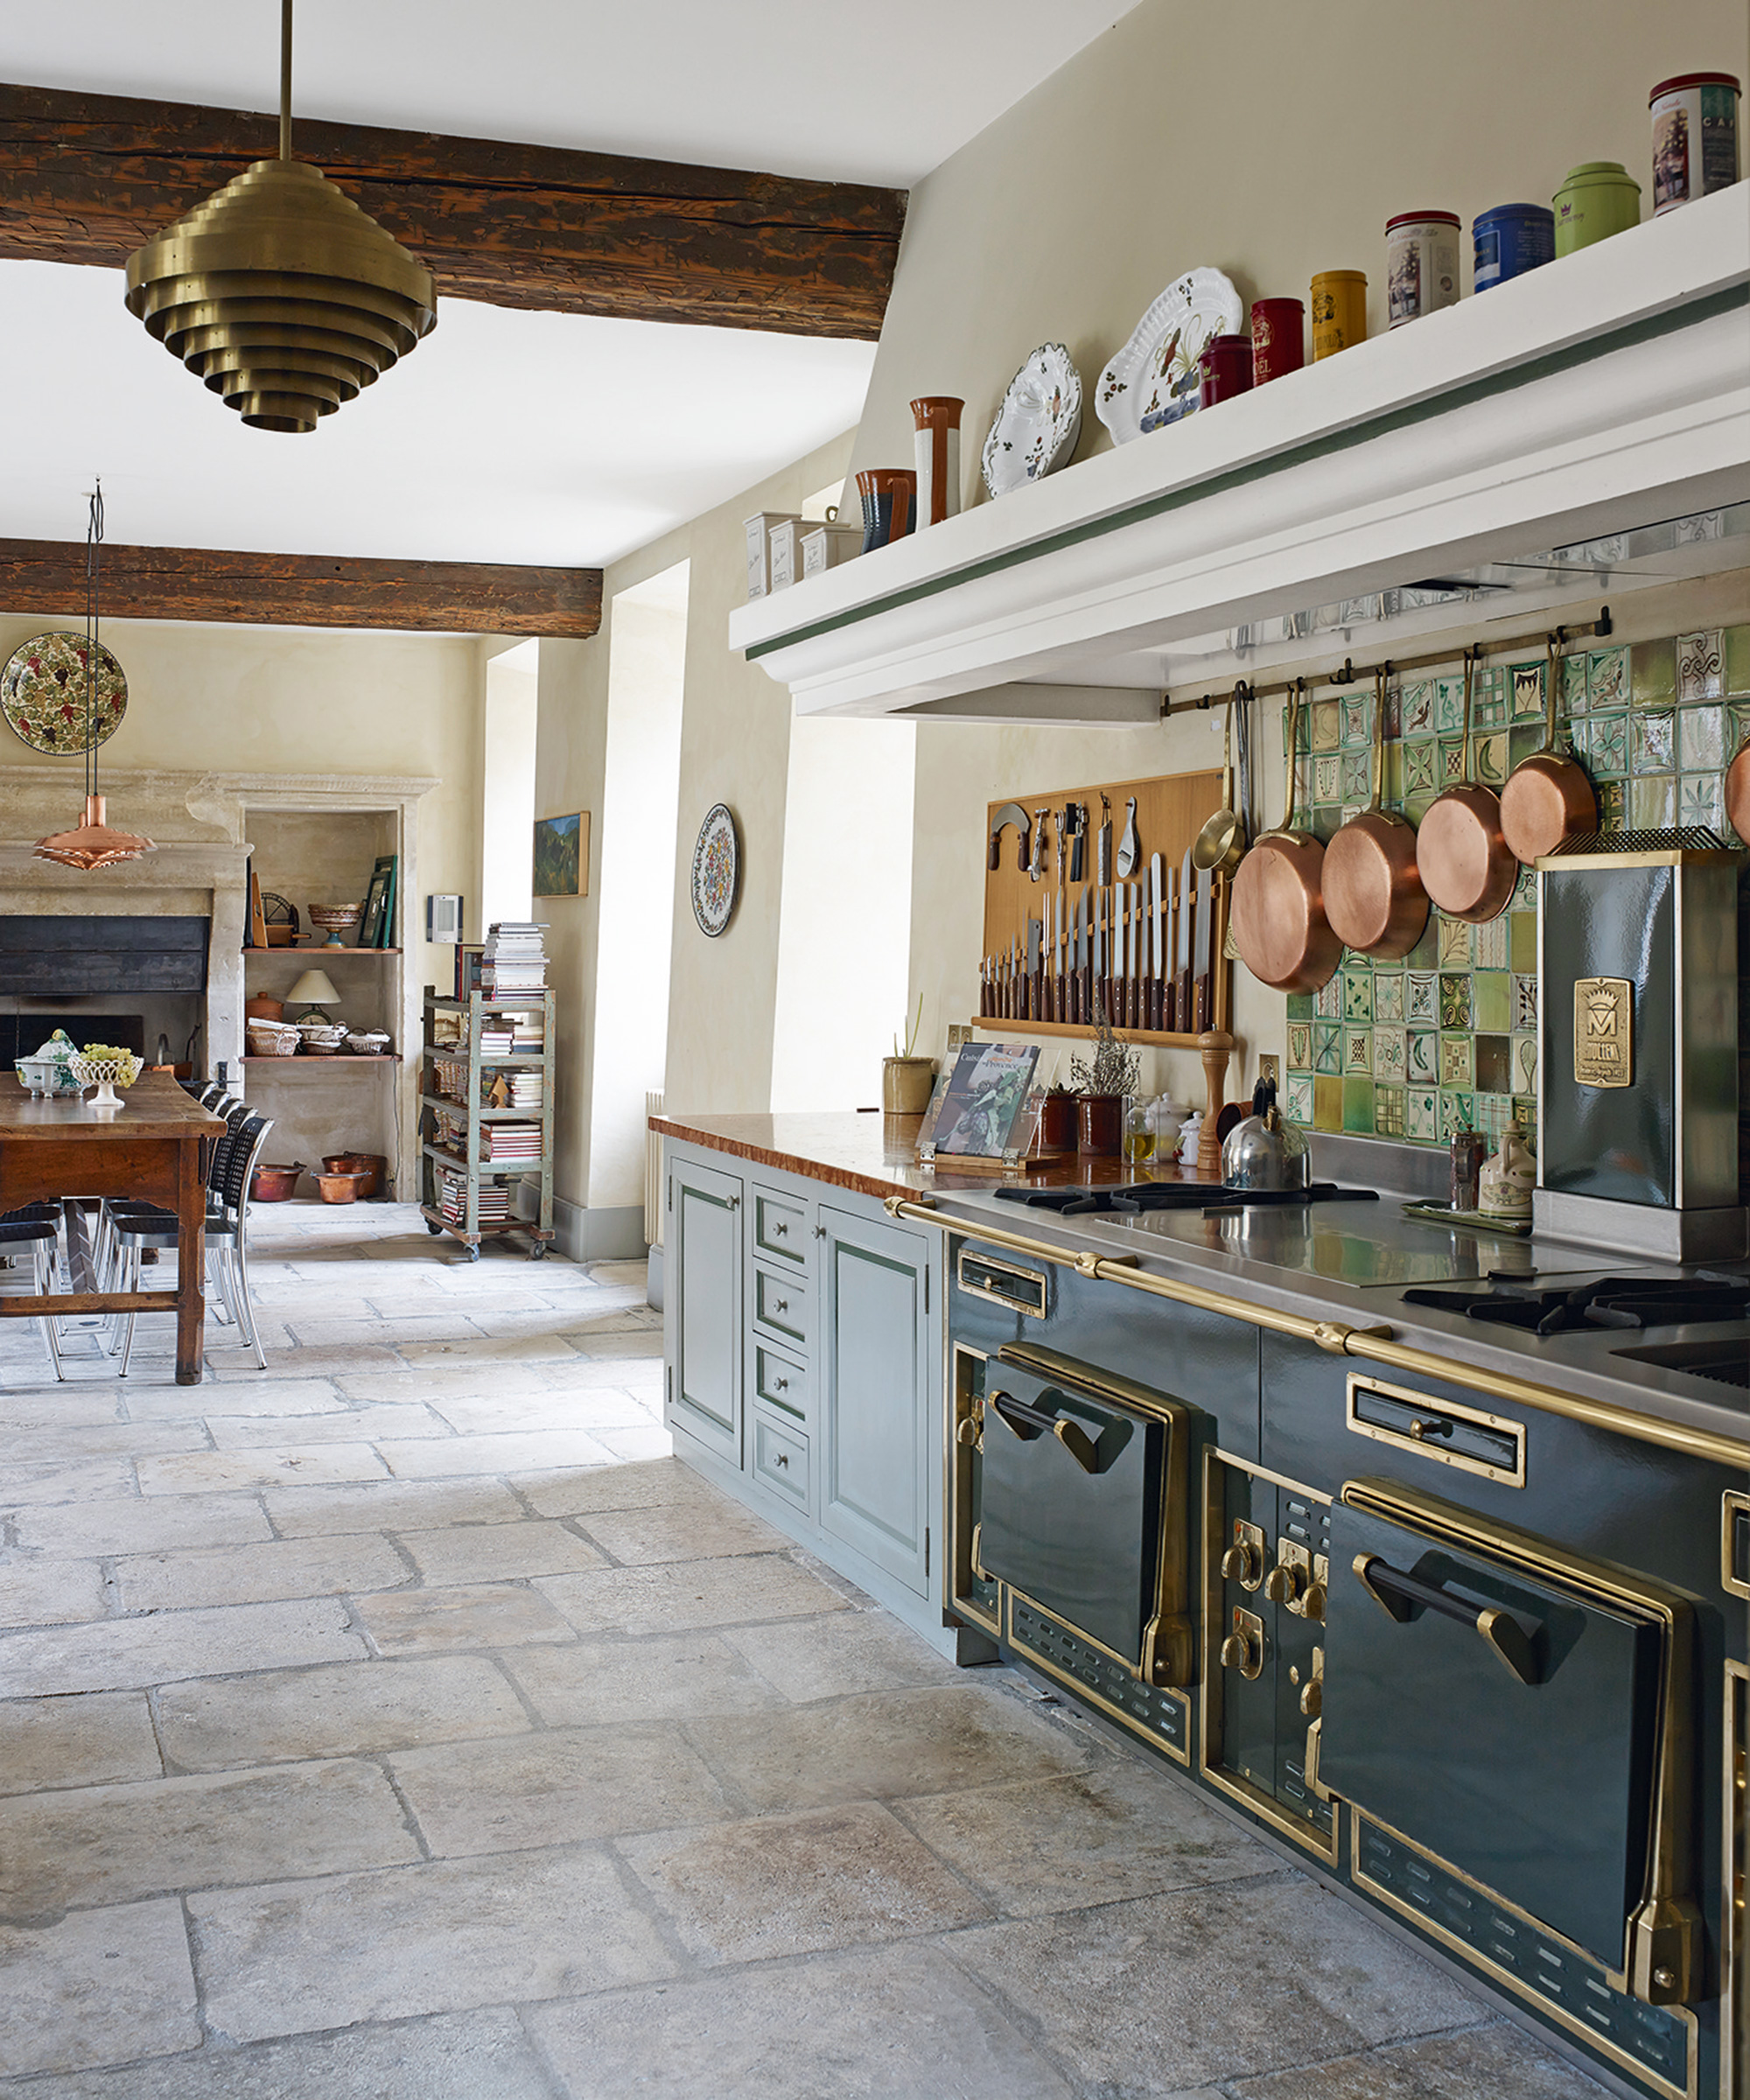 Traditional open plan kitchen ideas with rustic stone flooring and a vintage range oven.